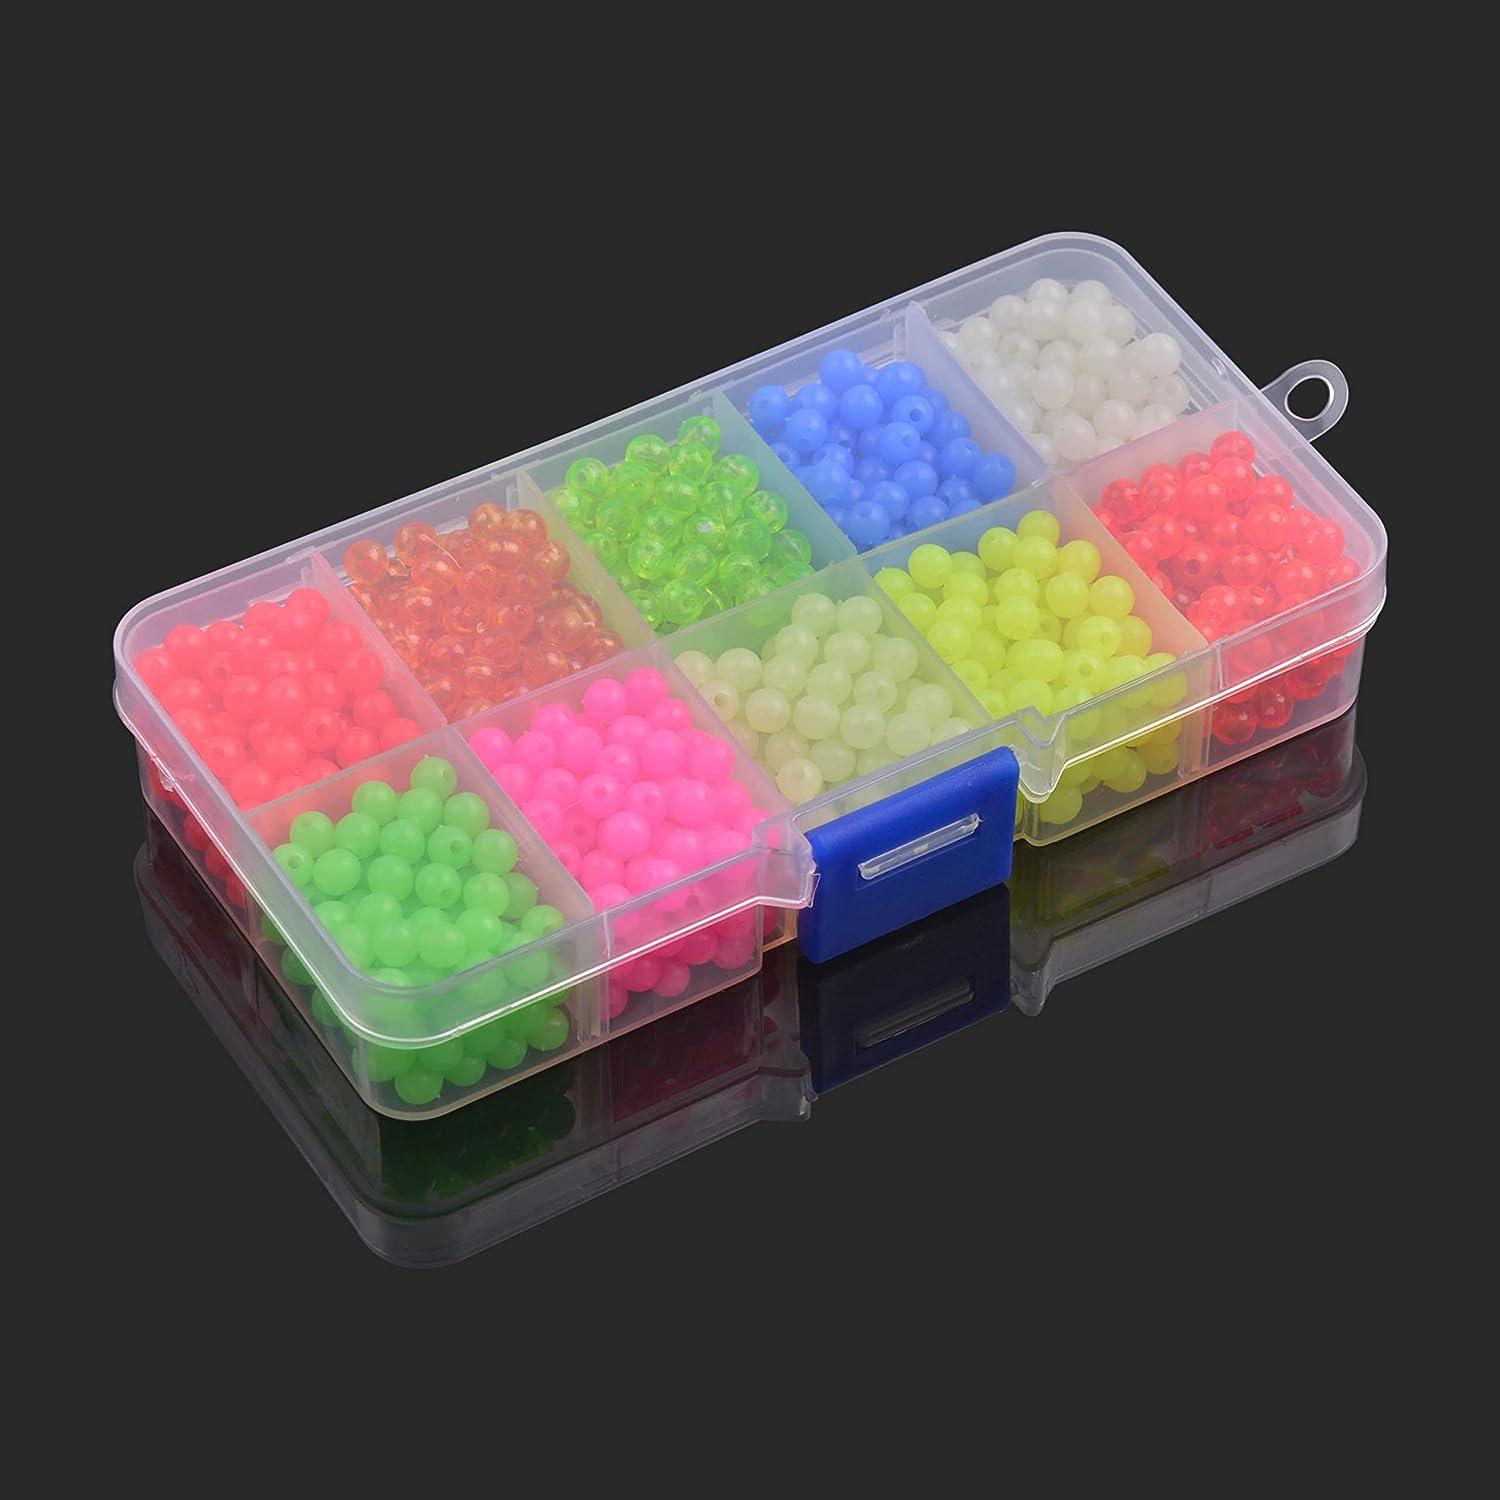 What is 8mm Glow Fishing Beads Soft Plastic Round Beads Rubber Soft Beads  Fishing Lures Accessories Box Green Fishing Bait Eggs